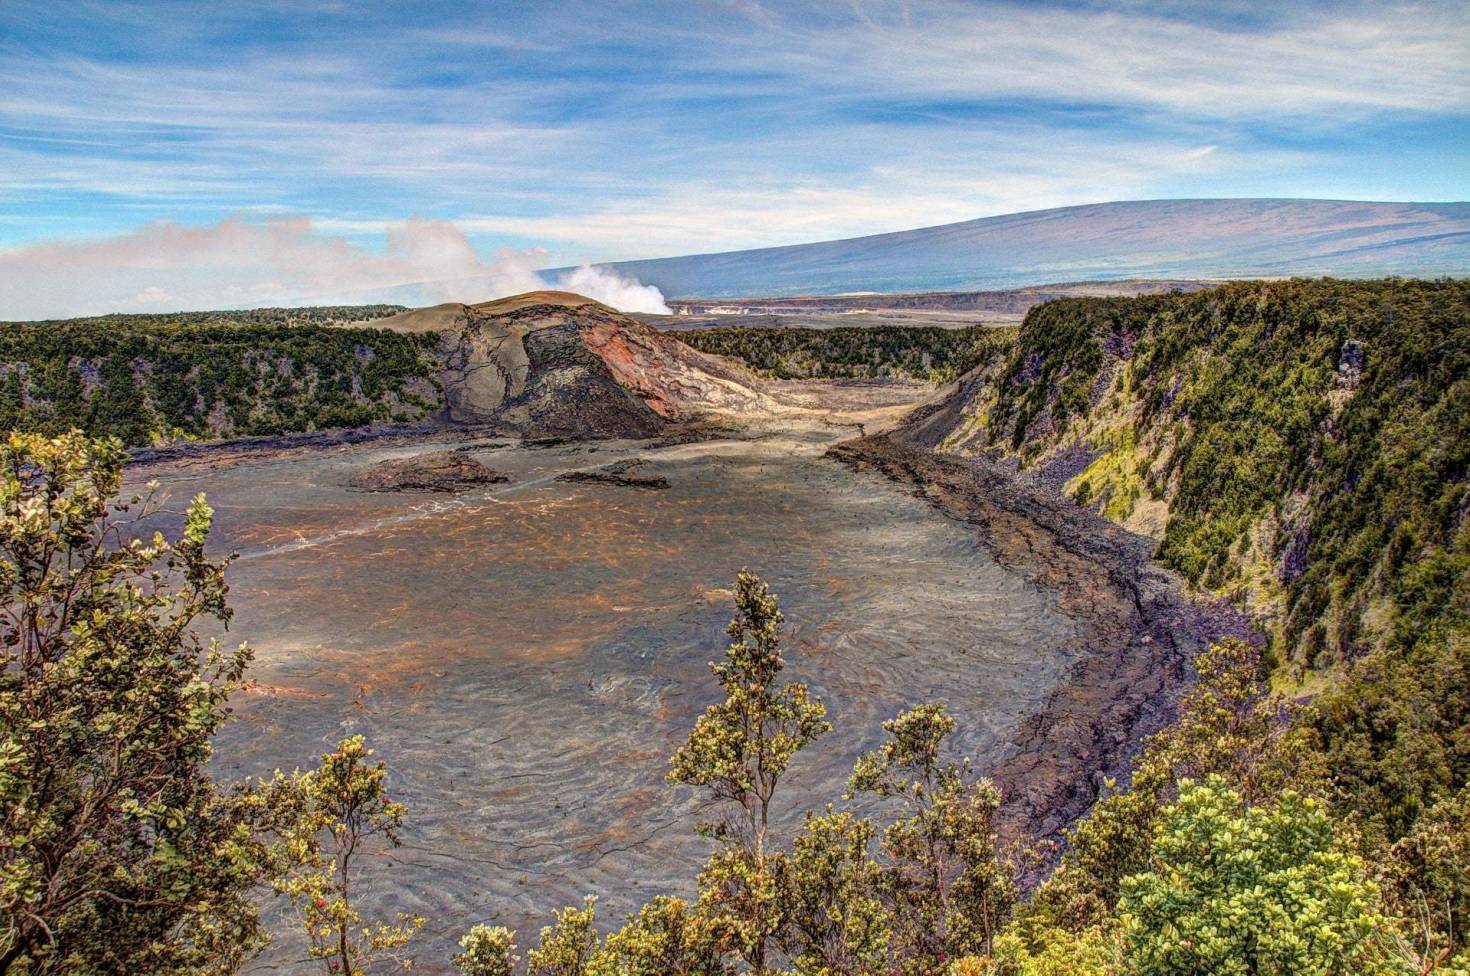 Kilauea Crater in Volcanoes National Park